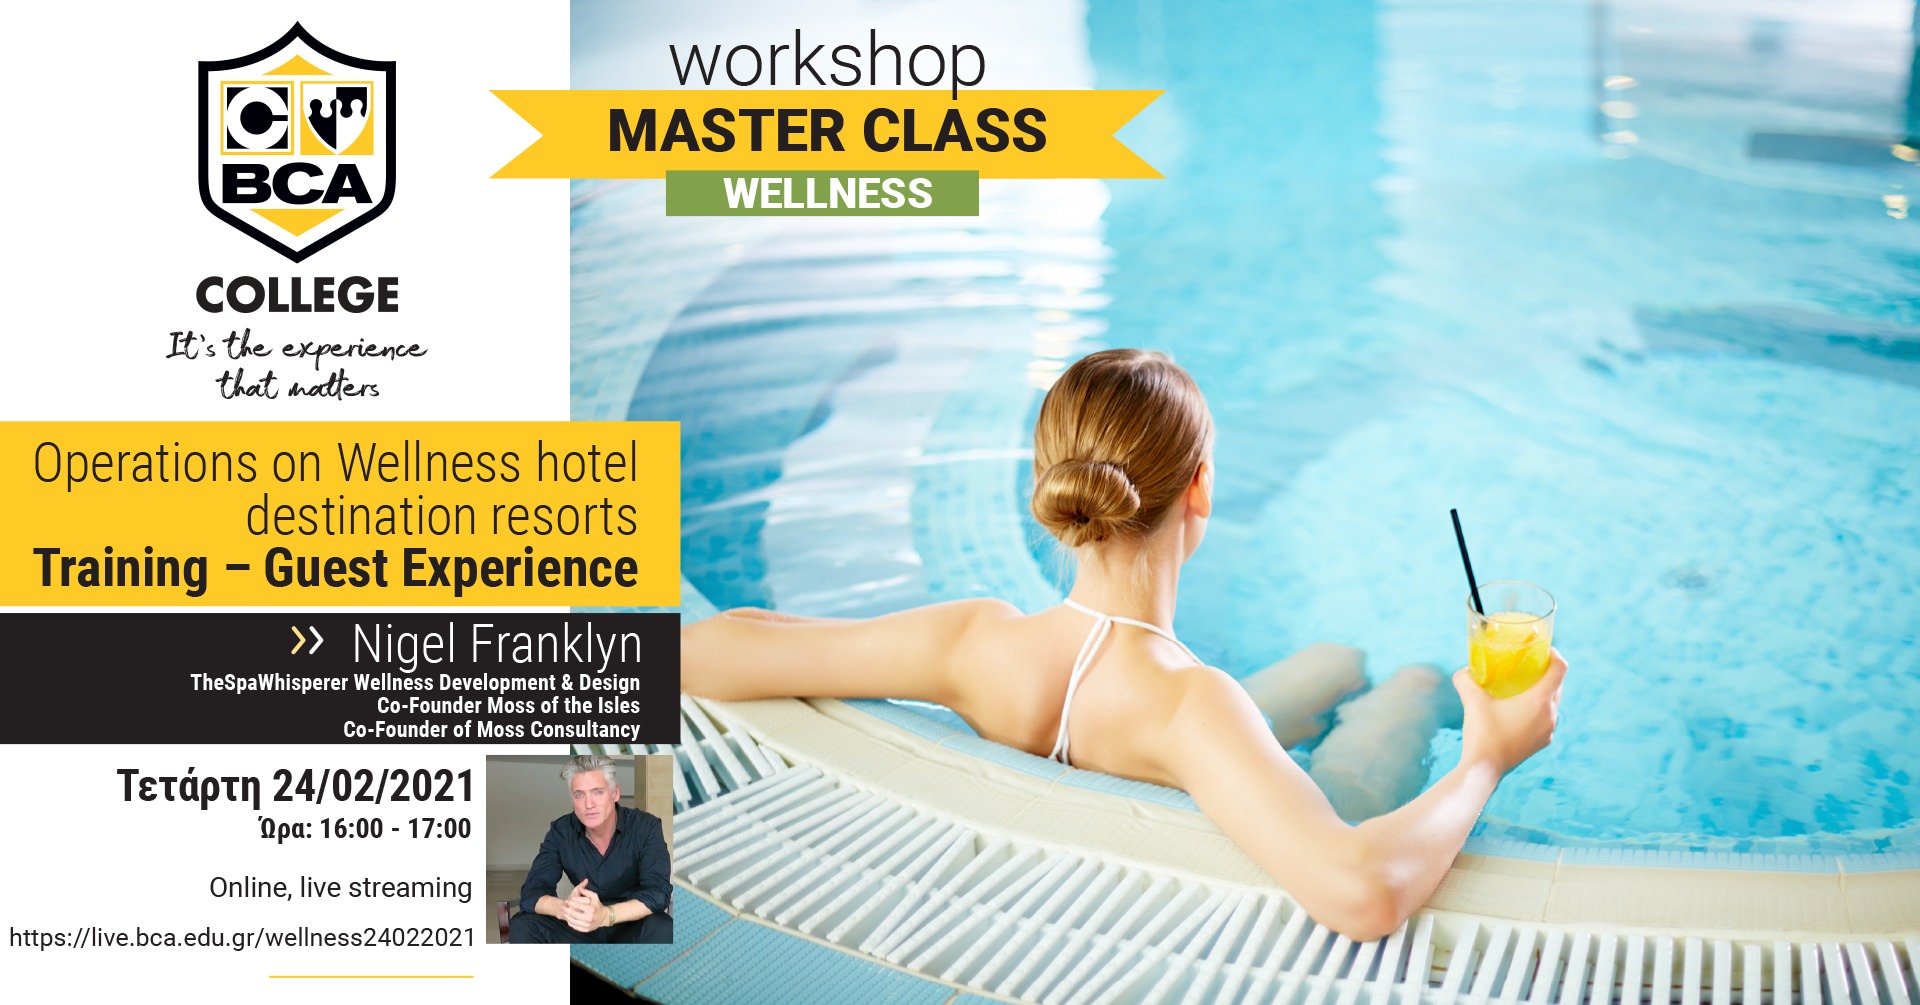 Operations on Wellness hotel destination resorts. Training - Guest Experience